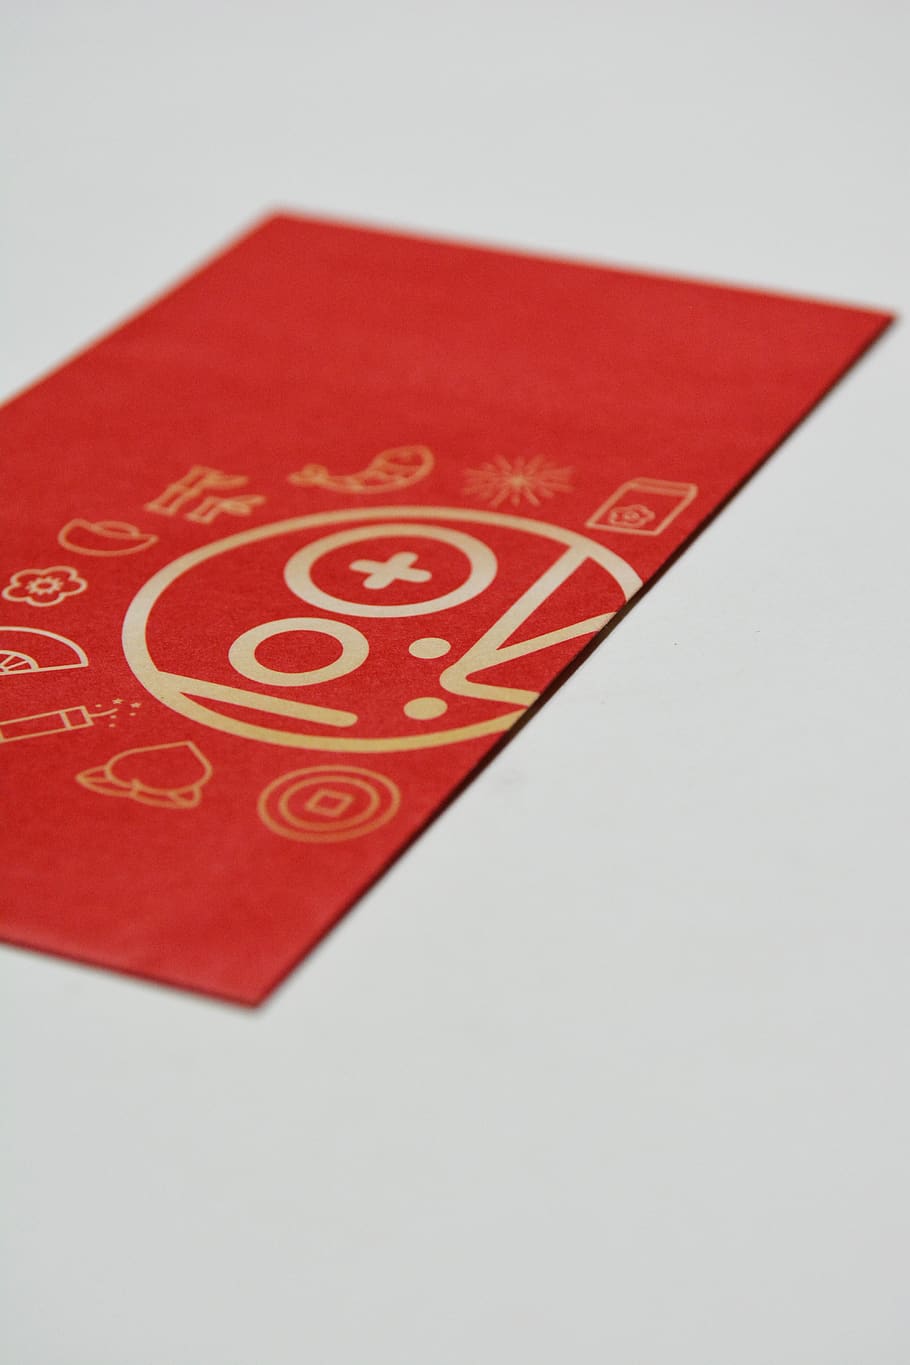 red, new year, chinese new year, red envelope, studio shot, indoors, close-up, luck, leisure games, cards